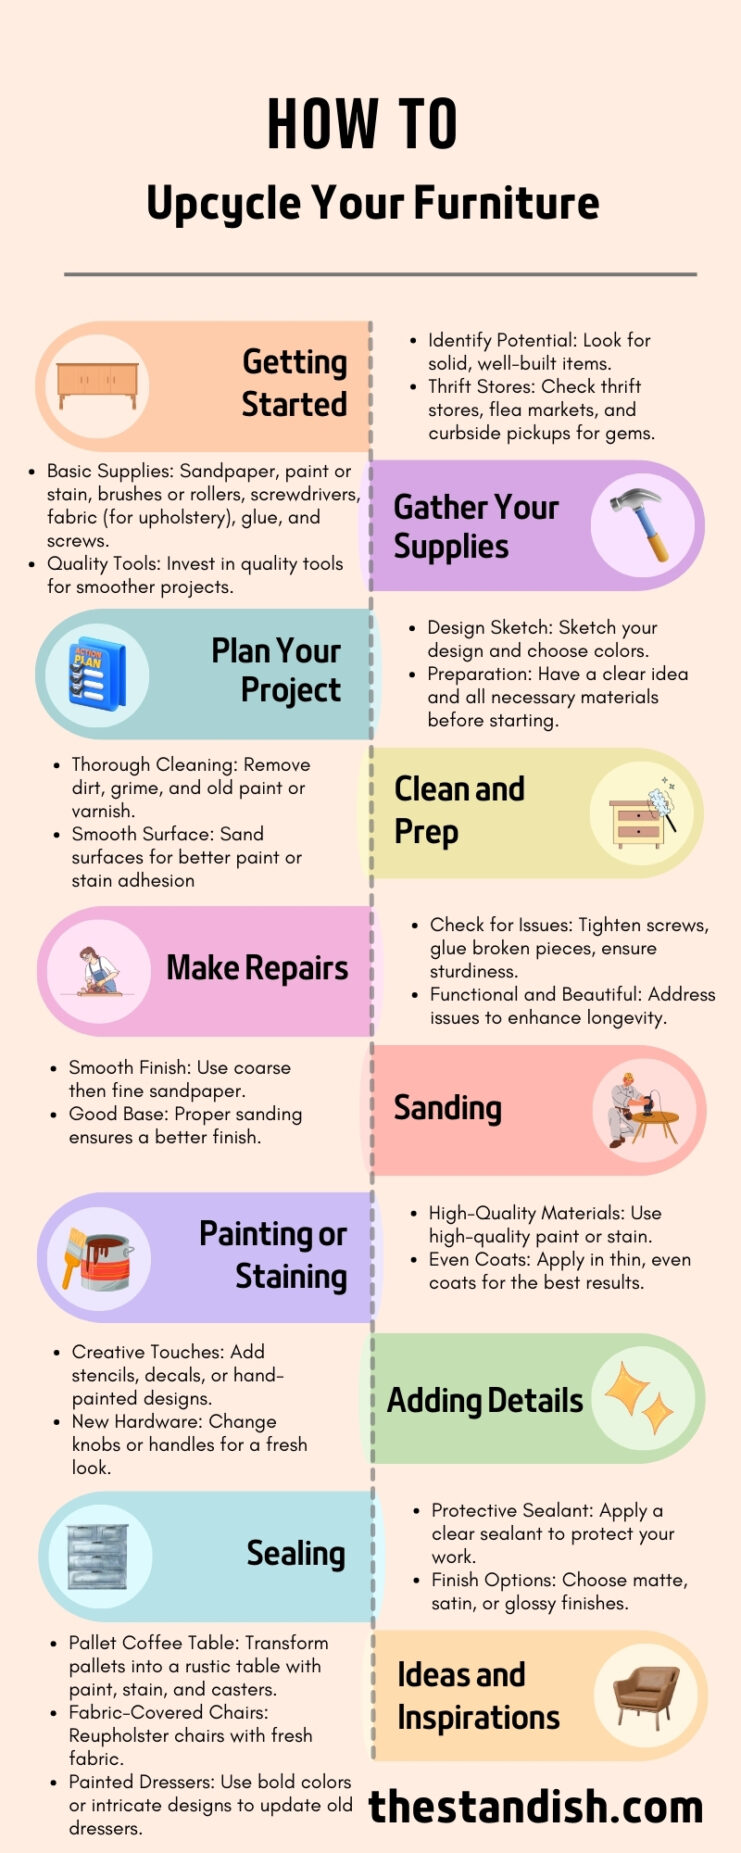 How to Upcycle Your Furniture Infographic